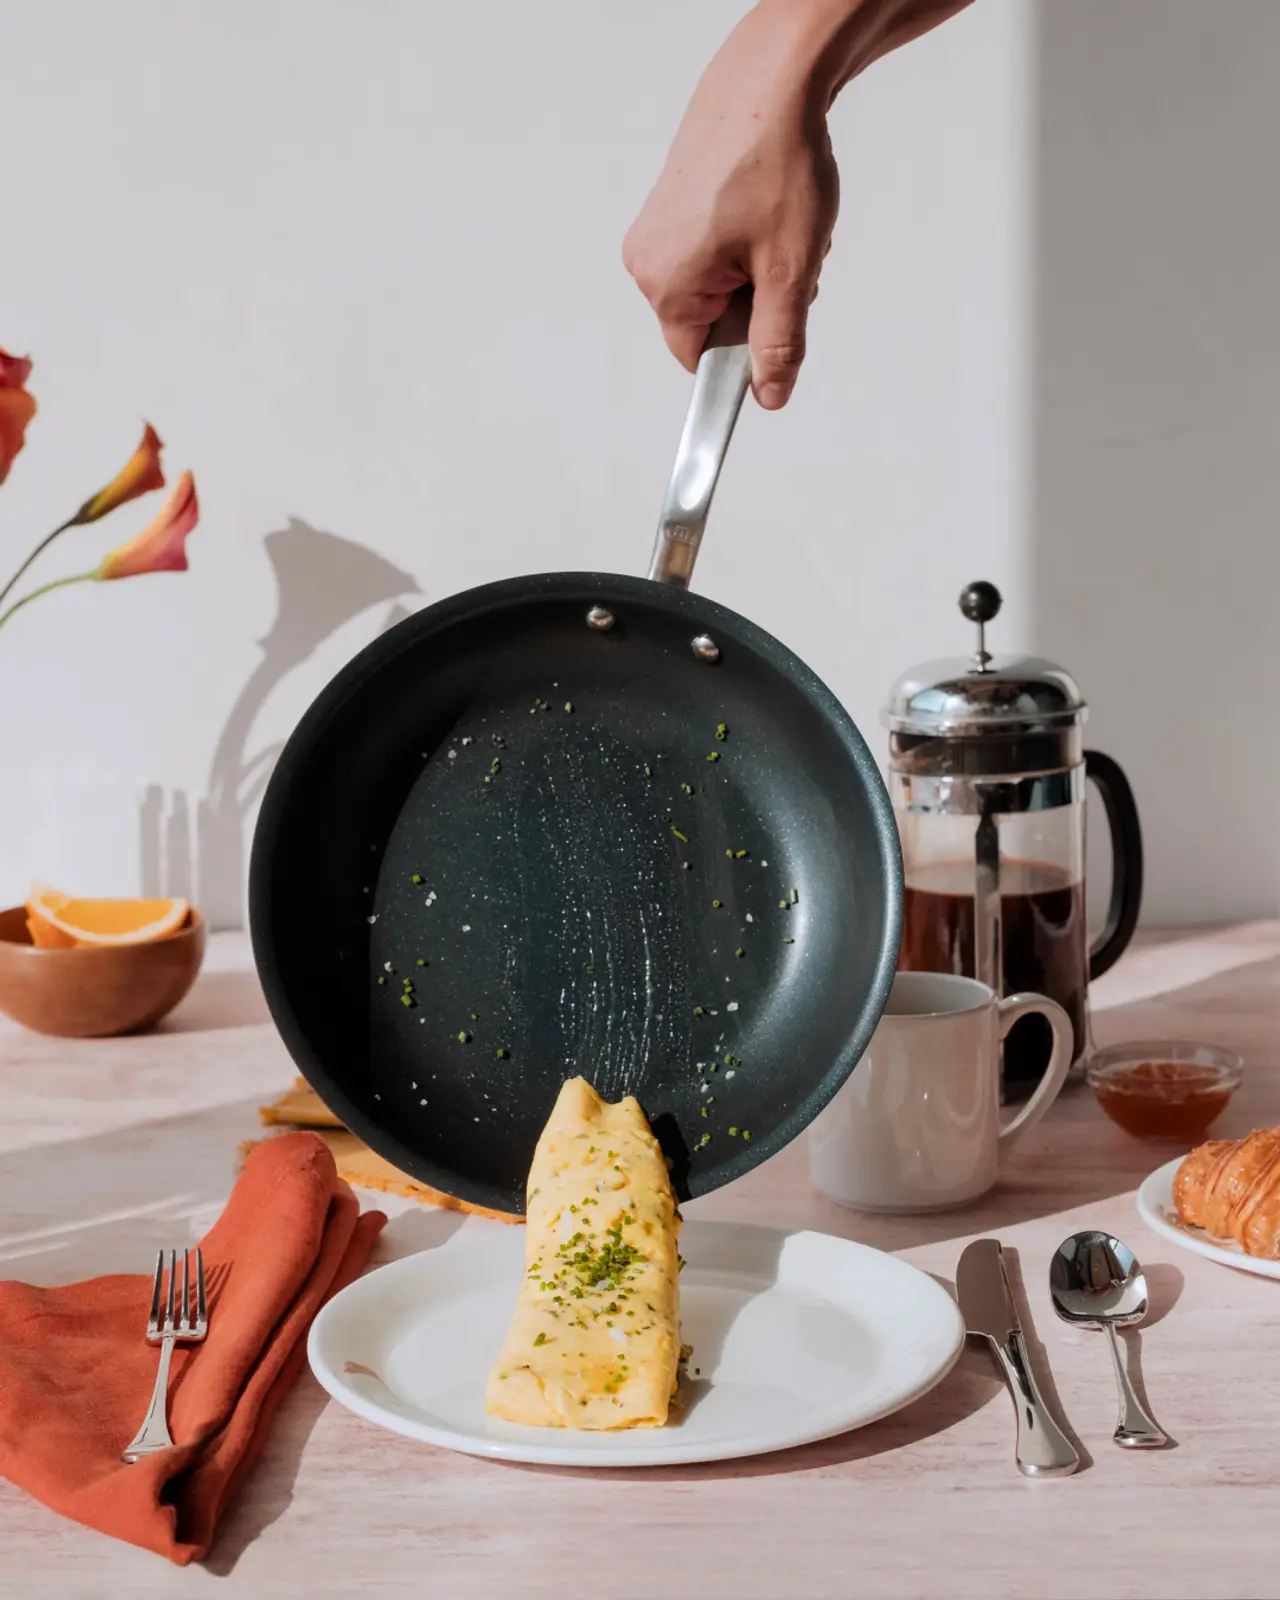 A hand is flipping an omelette from a frying pan onto a plate set for breakfast with a French press and a croissant on the table.